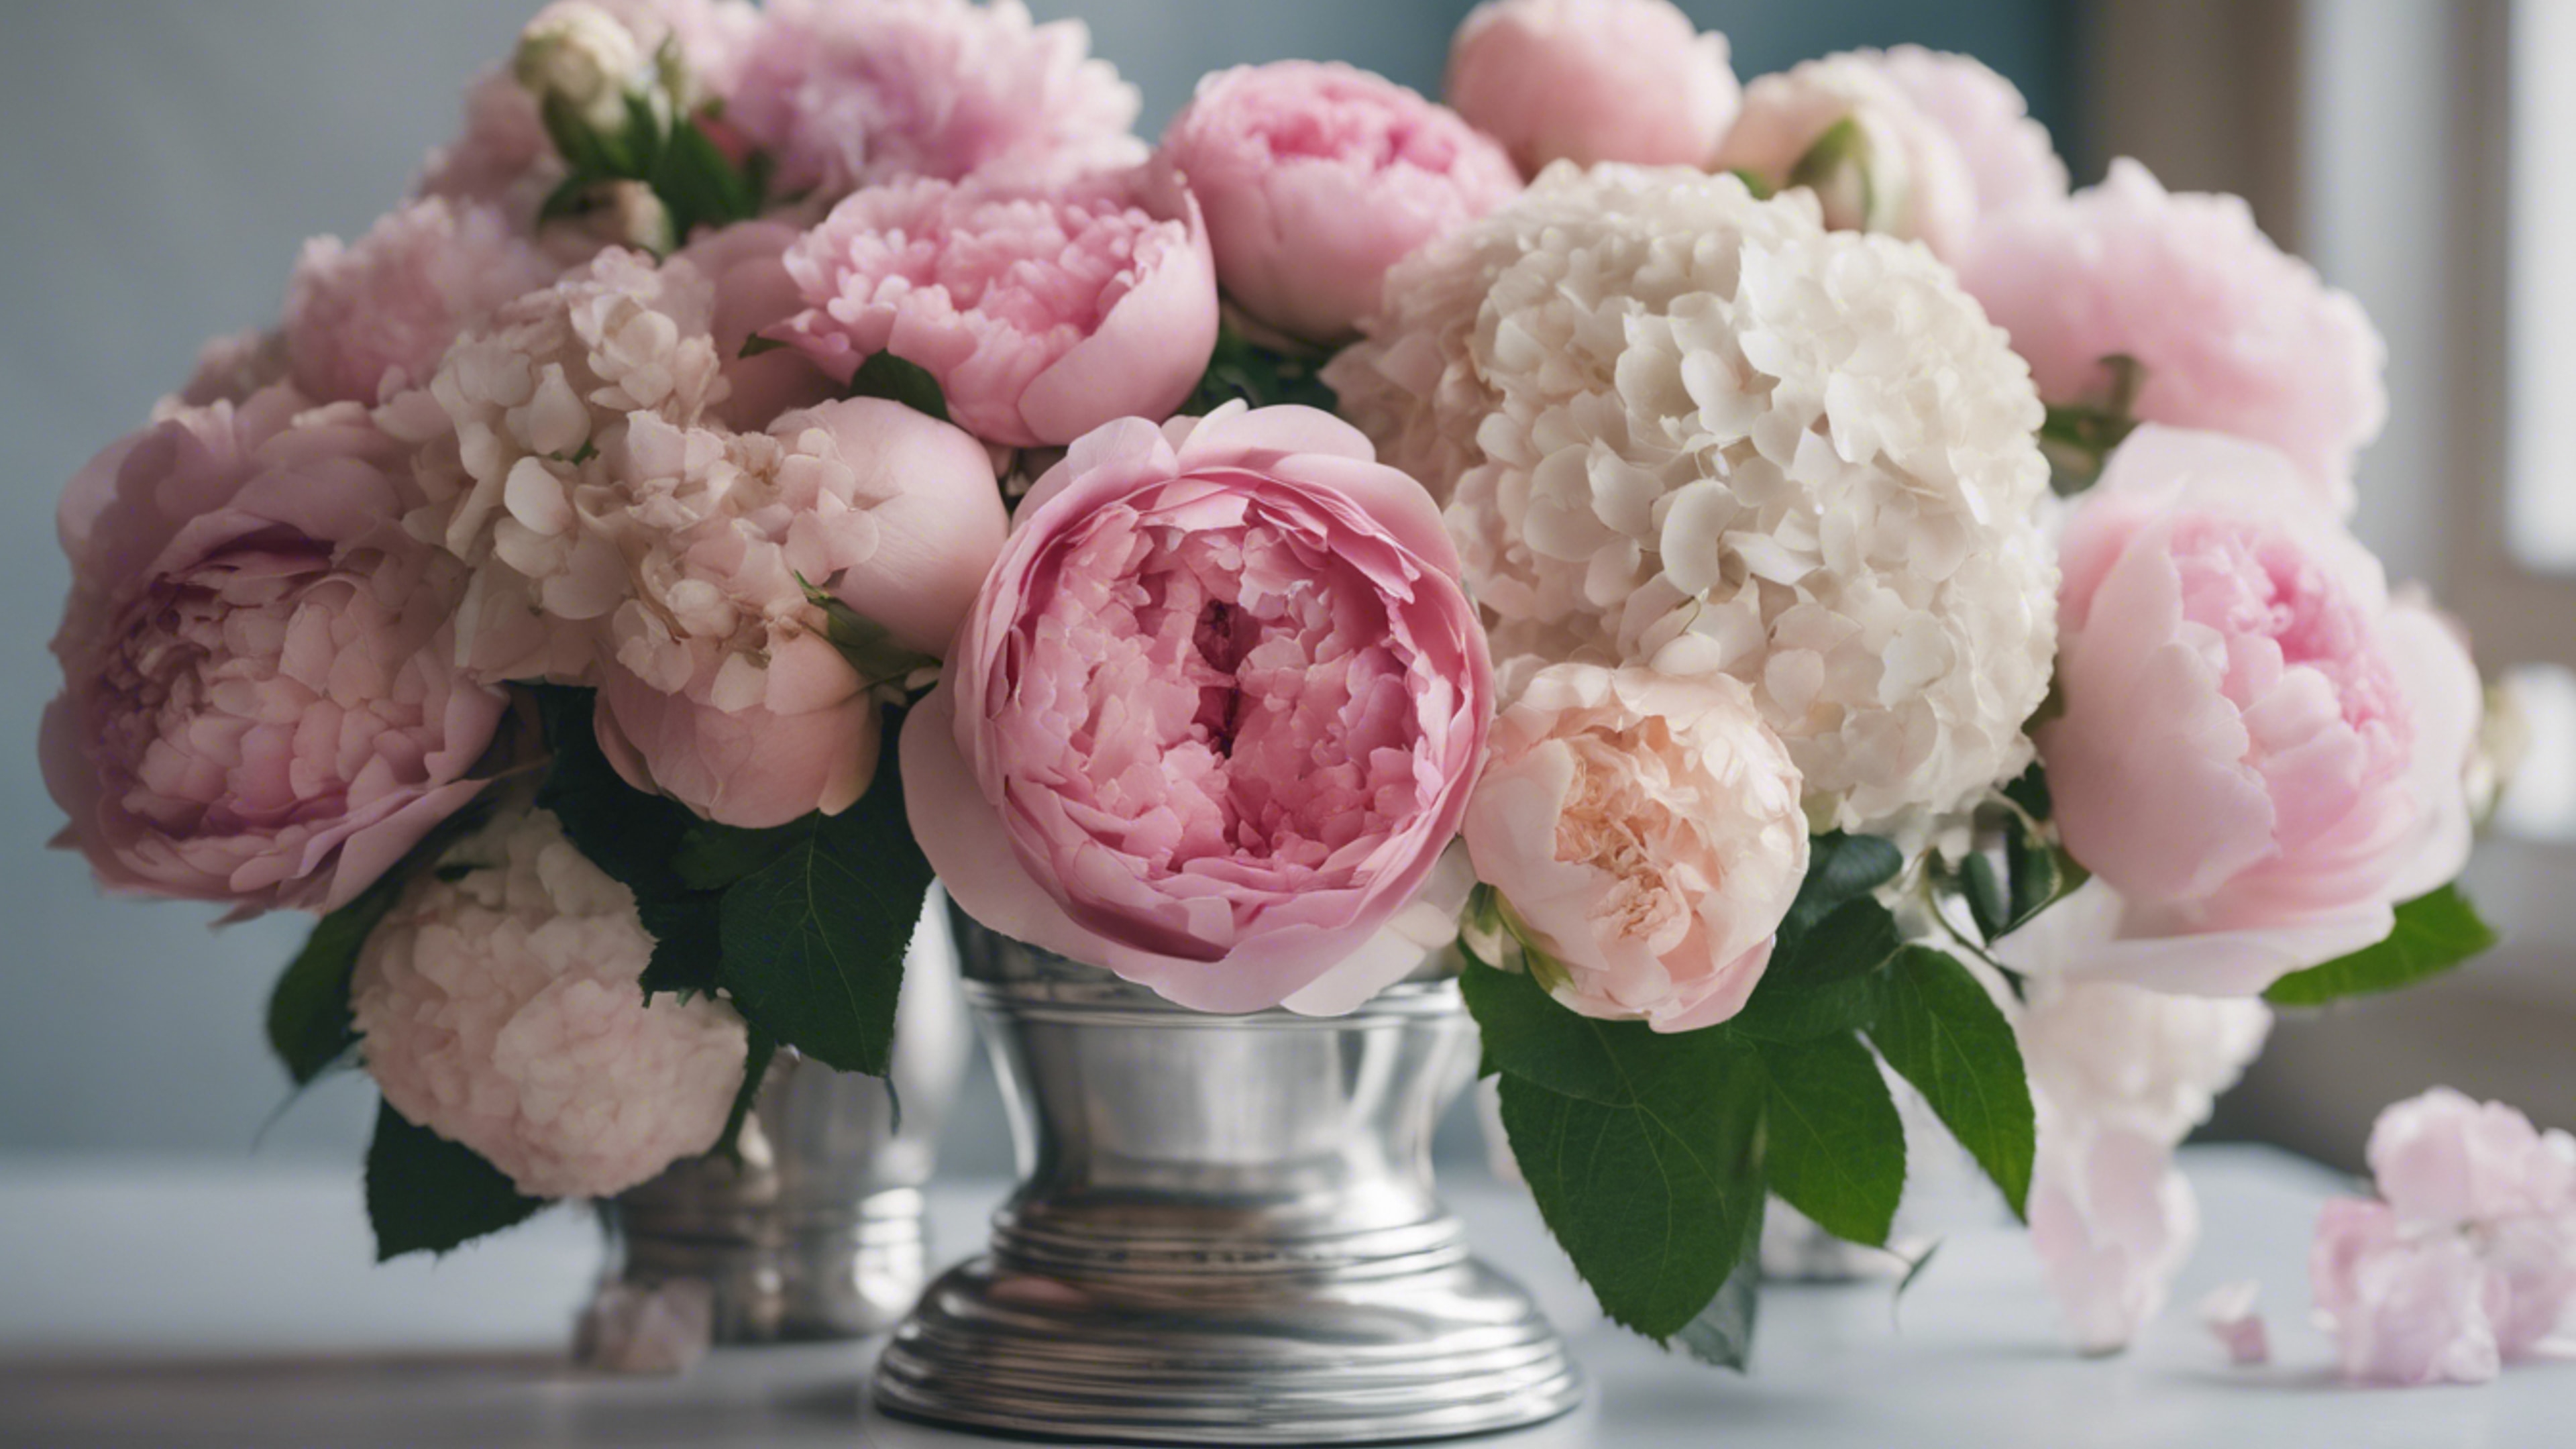 An arrangement of pink roses, peonies, and hydrangeas in a silver vase, embodying preppy elegance. טפט[810d260cf91945bd97fc]